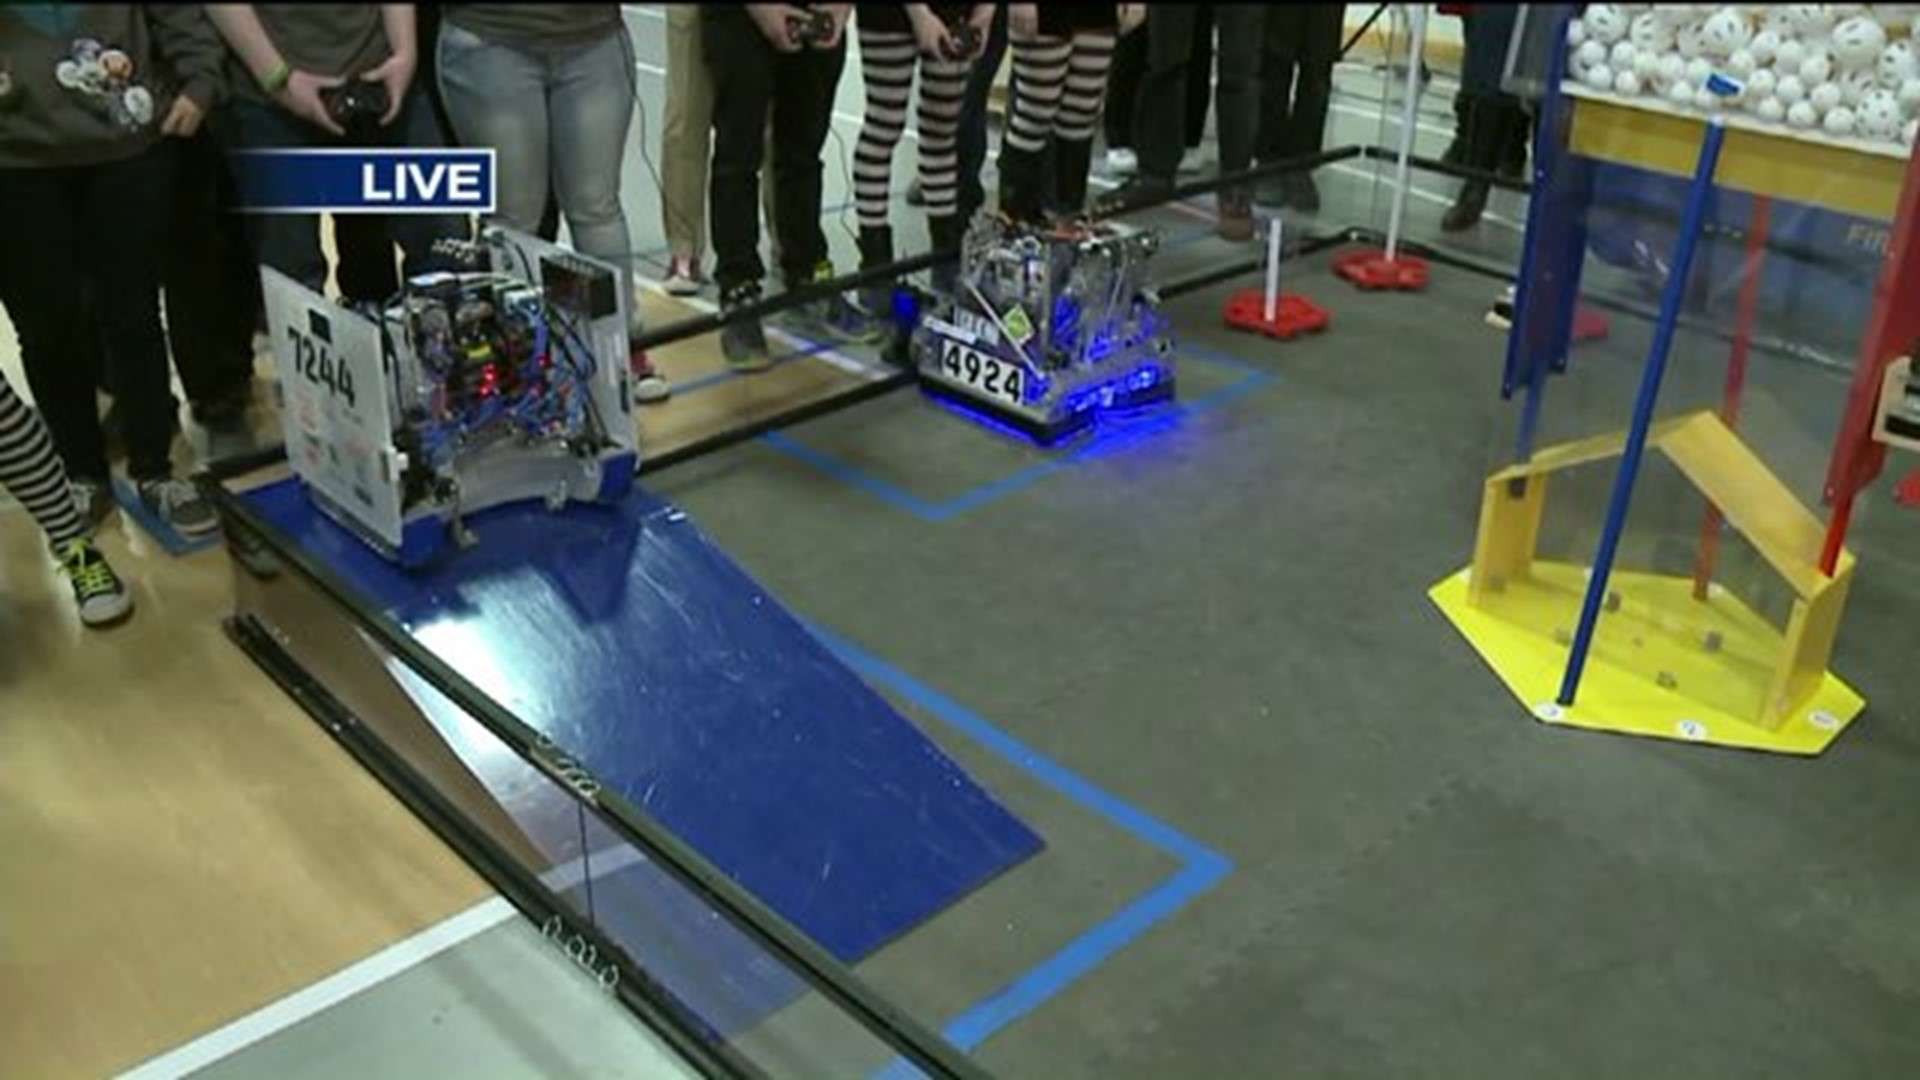 More than Robots: Competition at the U of S